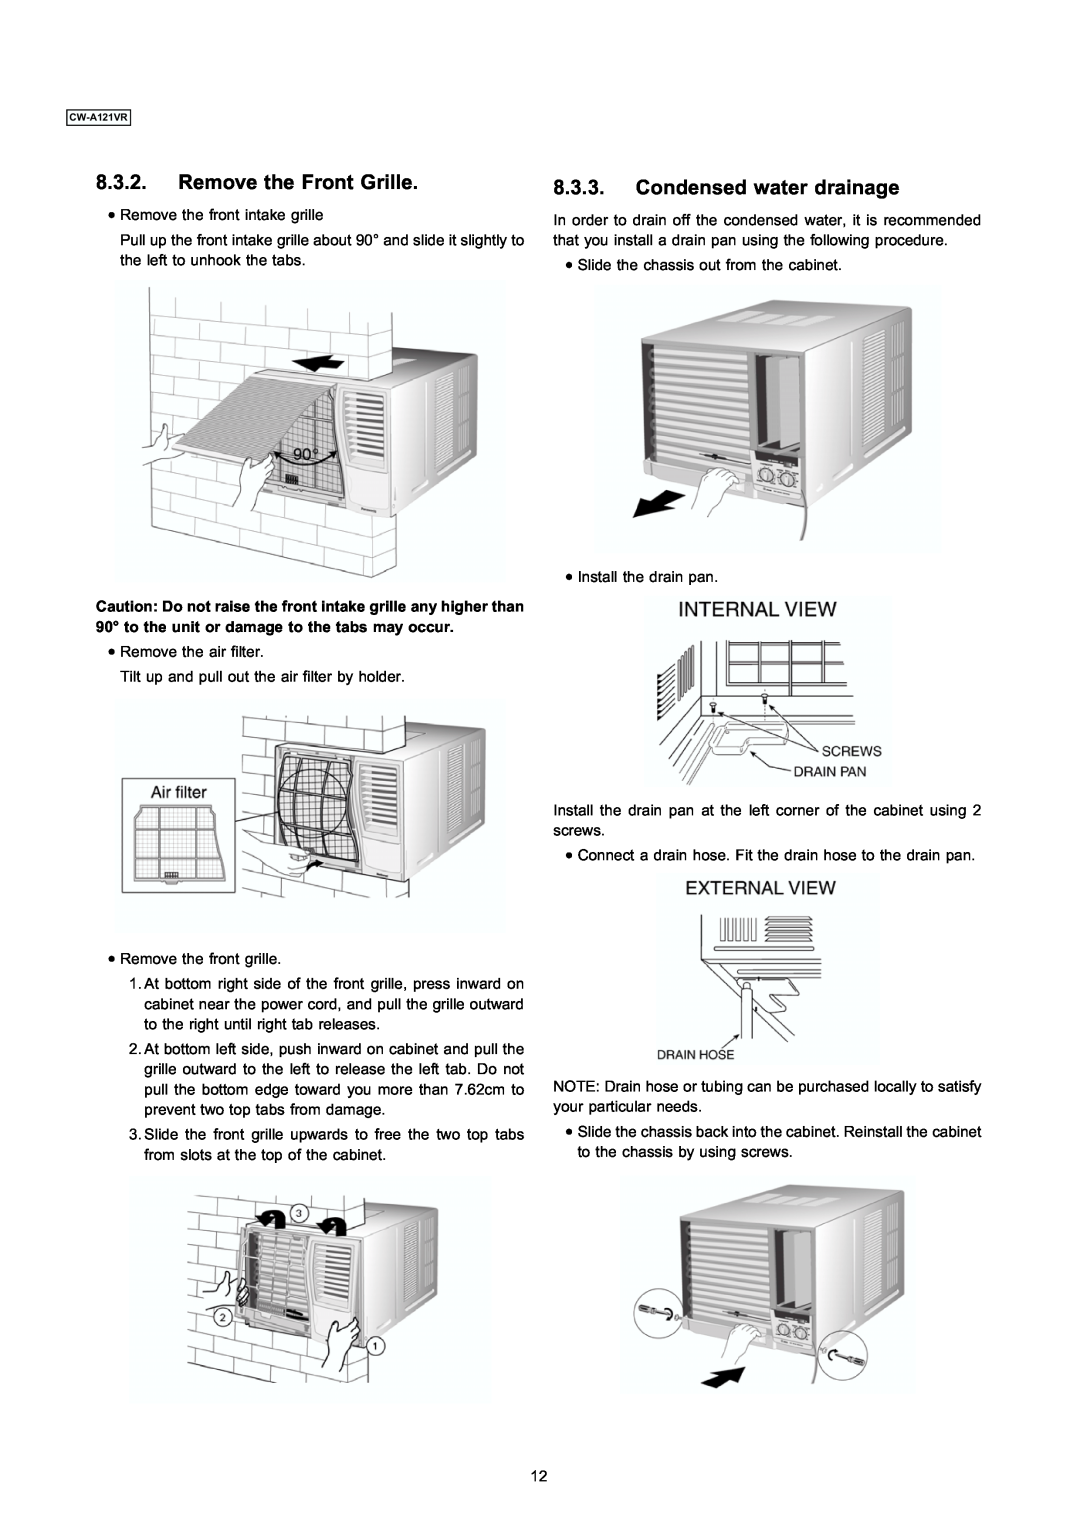 Panasonic CW-A121VR manual Remove the Front Grille, Condensed water drainage 